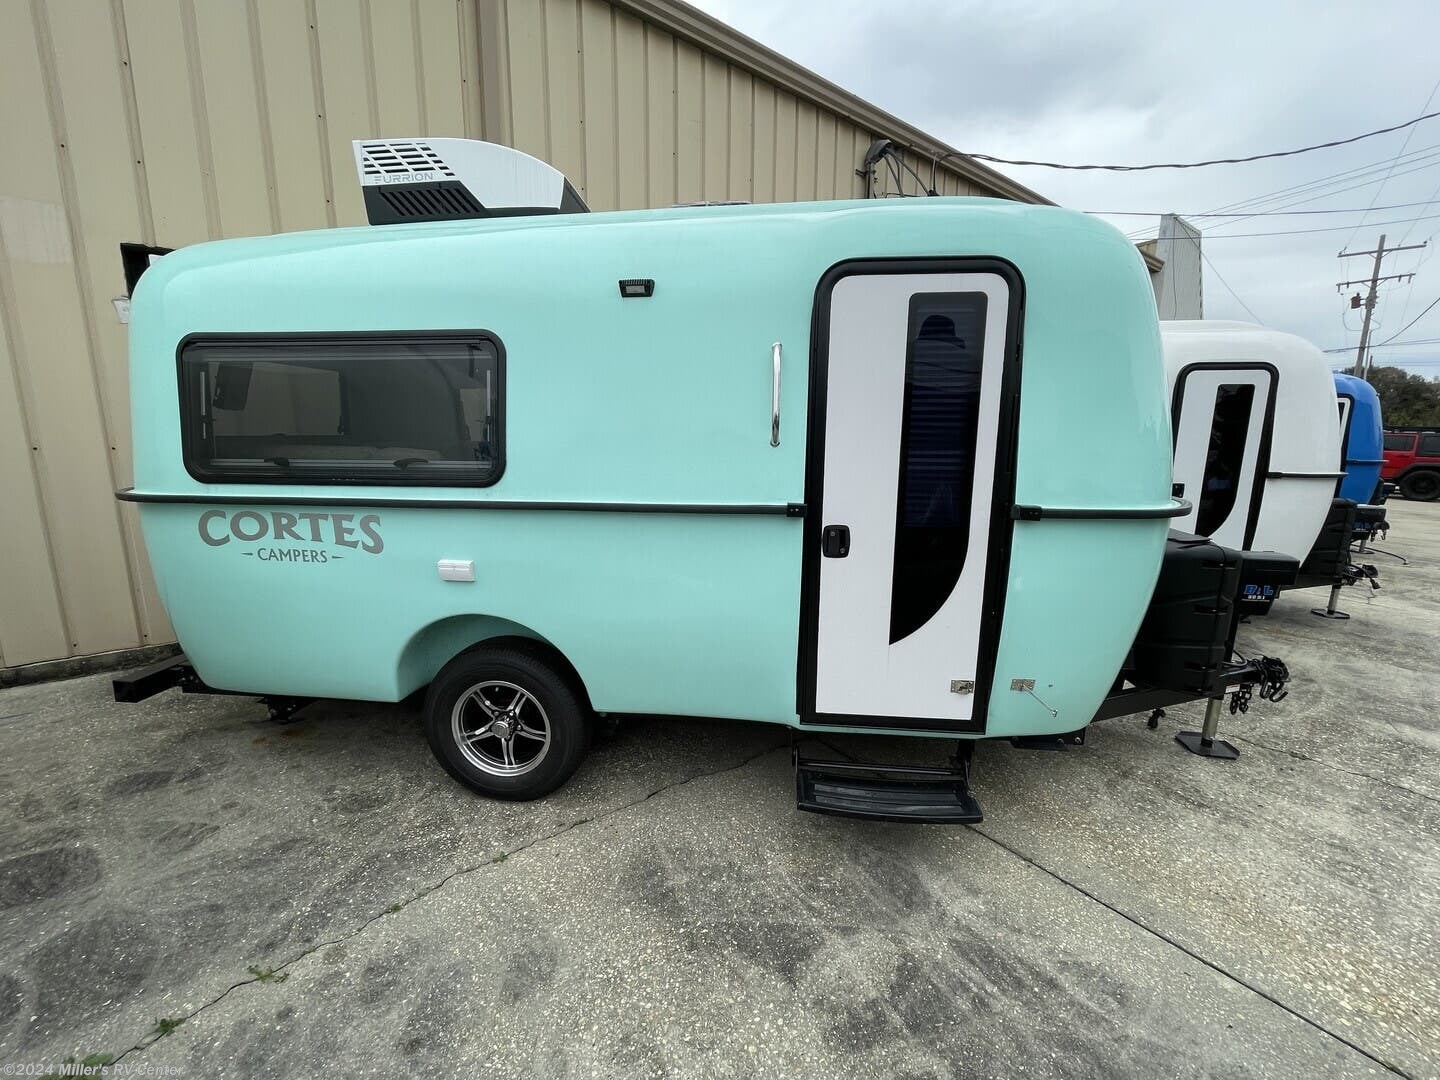 2023 Cortes Campers 17' RV for Sale in Baton Rouge, LA 70815 22178N